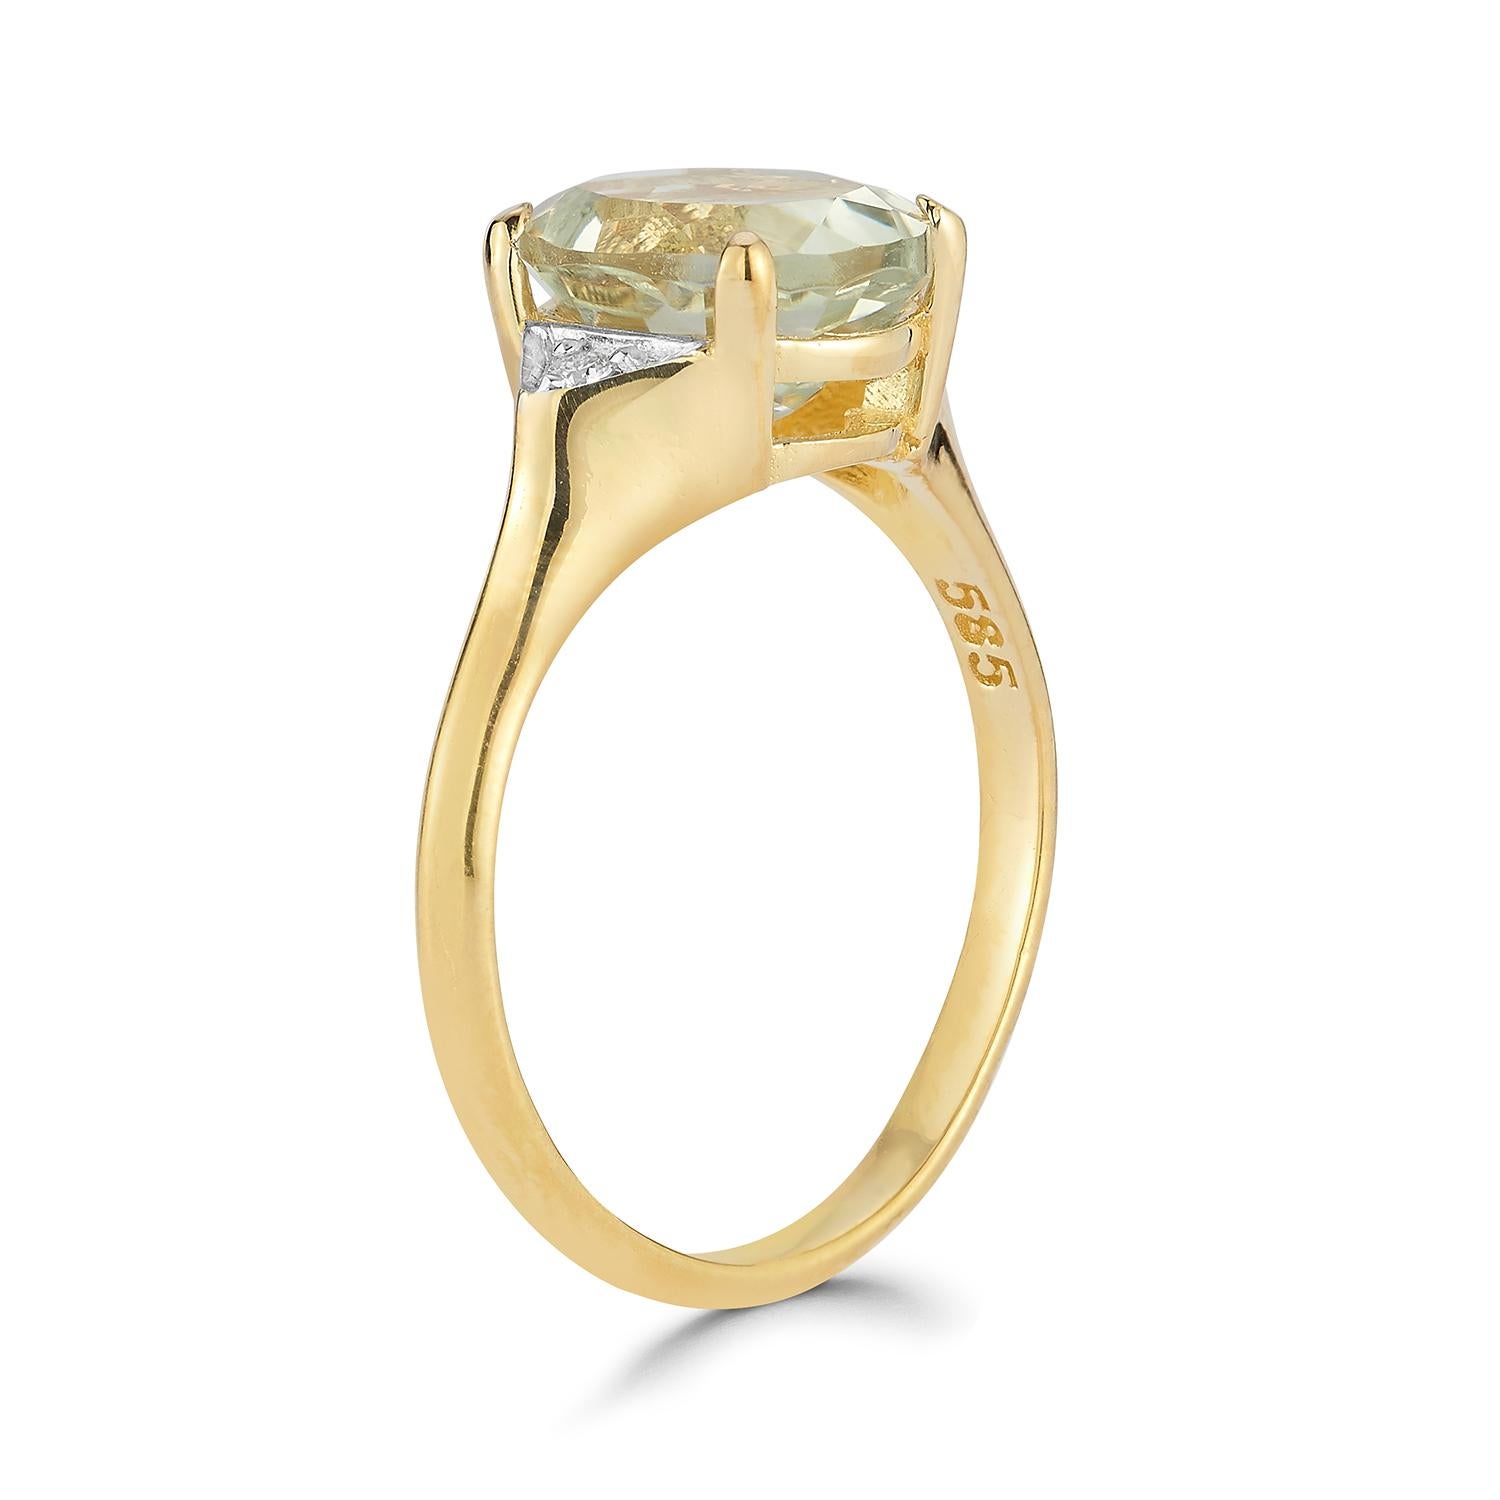 For Sale:  Hand-Crafted 14K Gold 0.05 ct. tw. Diamond & 5.25CT Green Amethyst Cocktail Ring 3